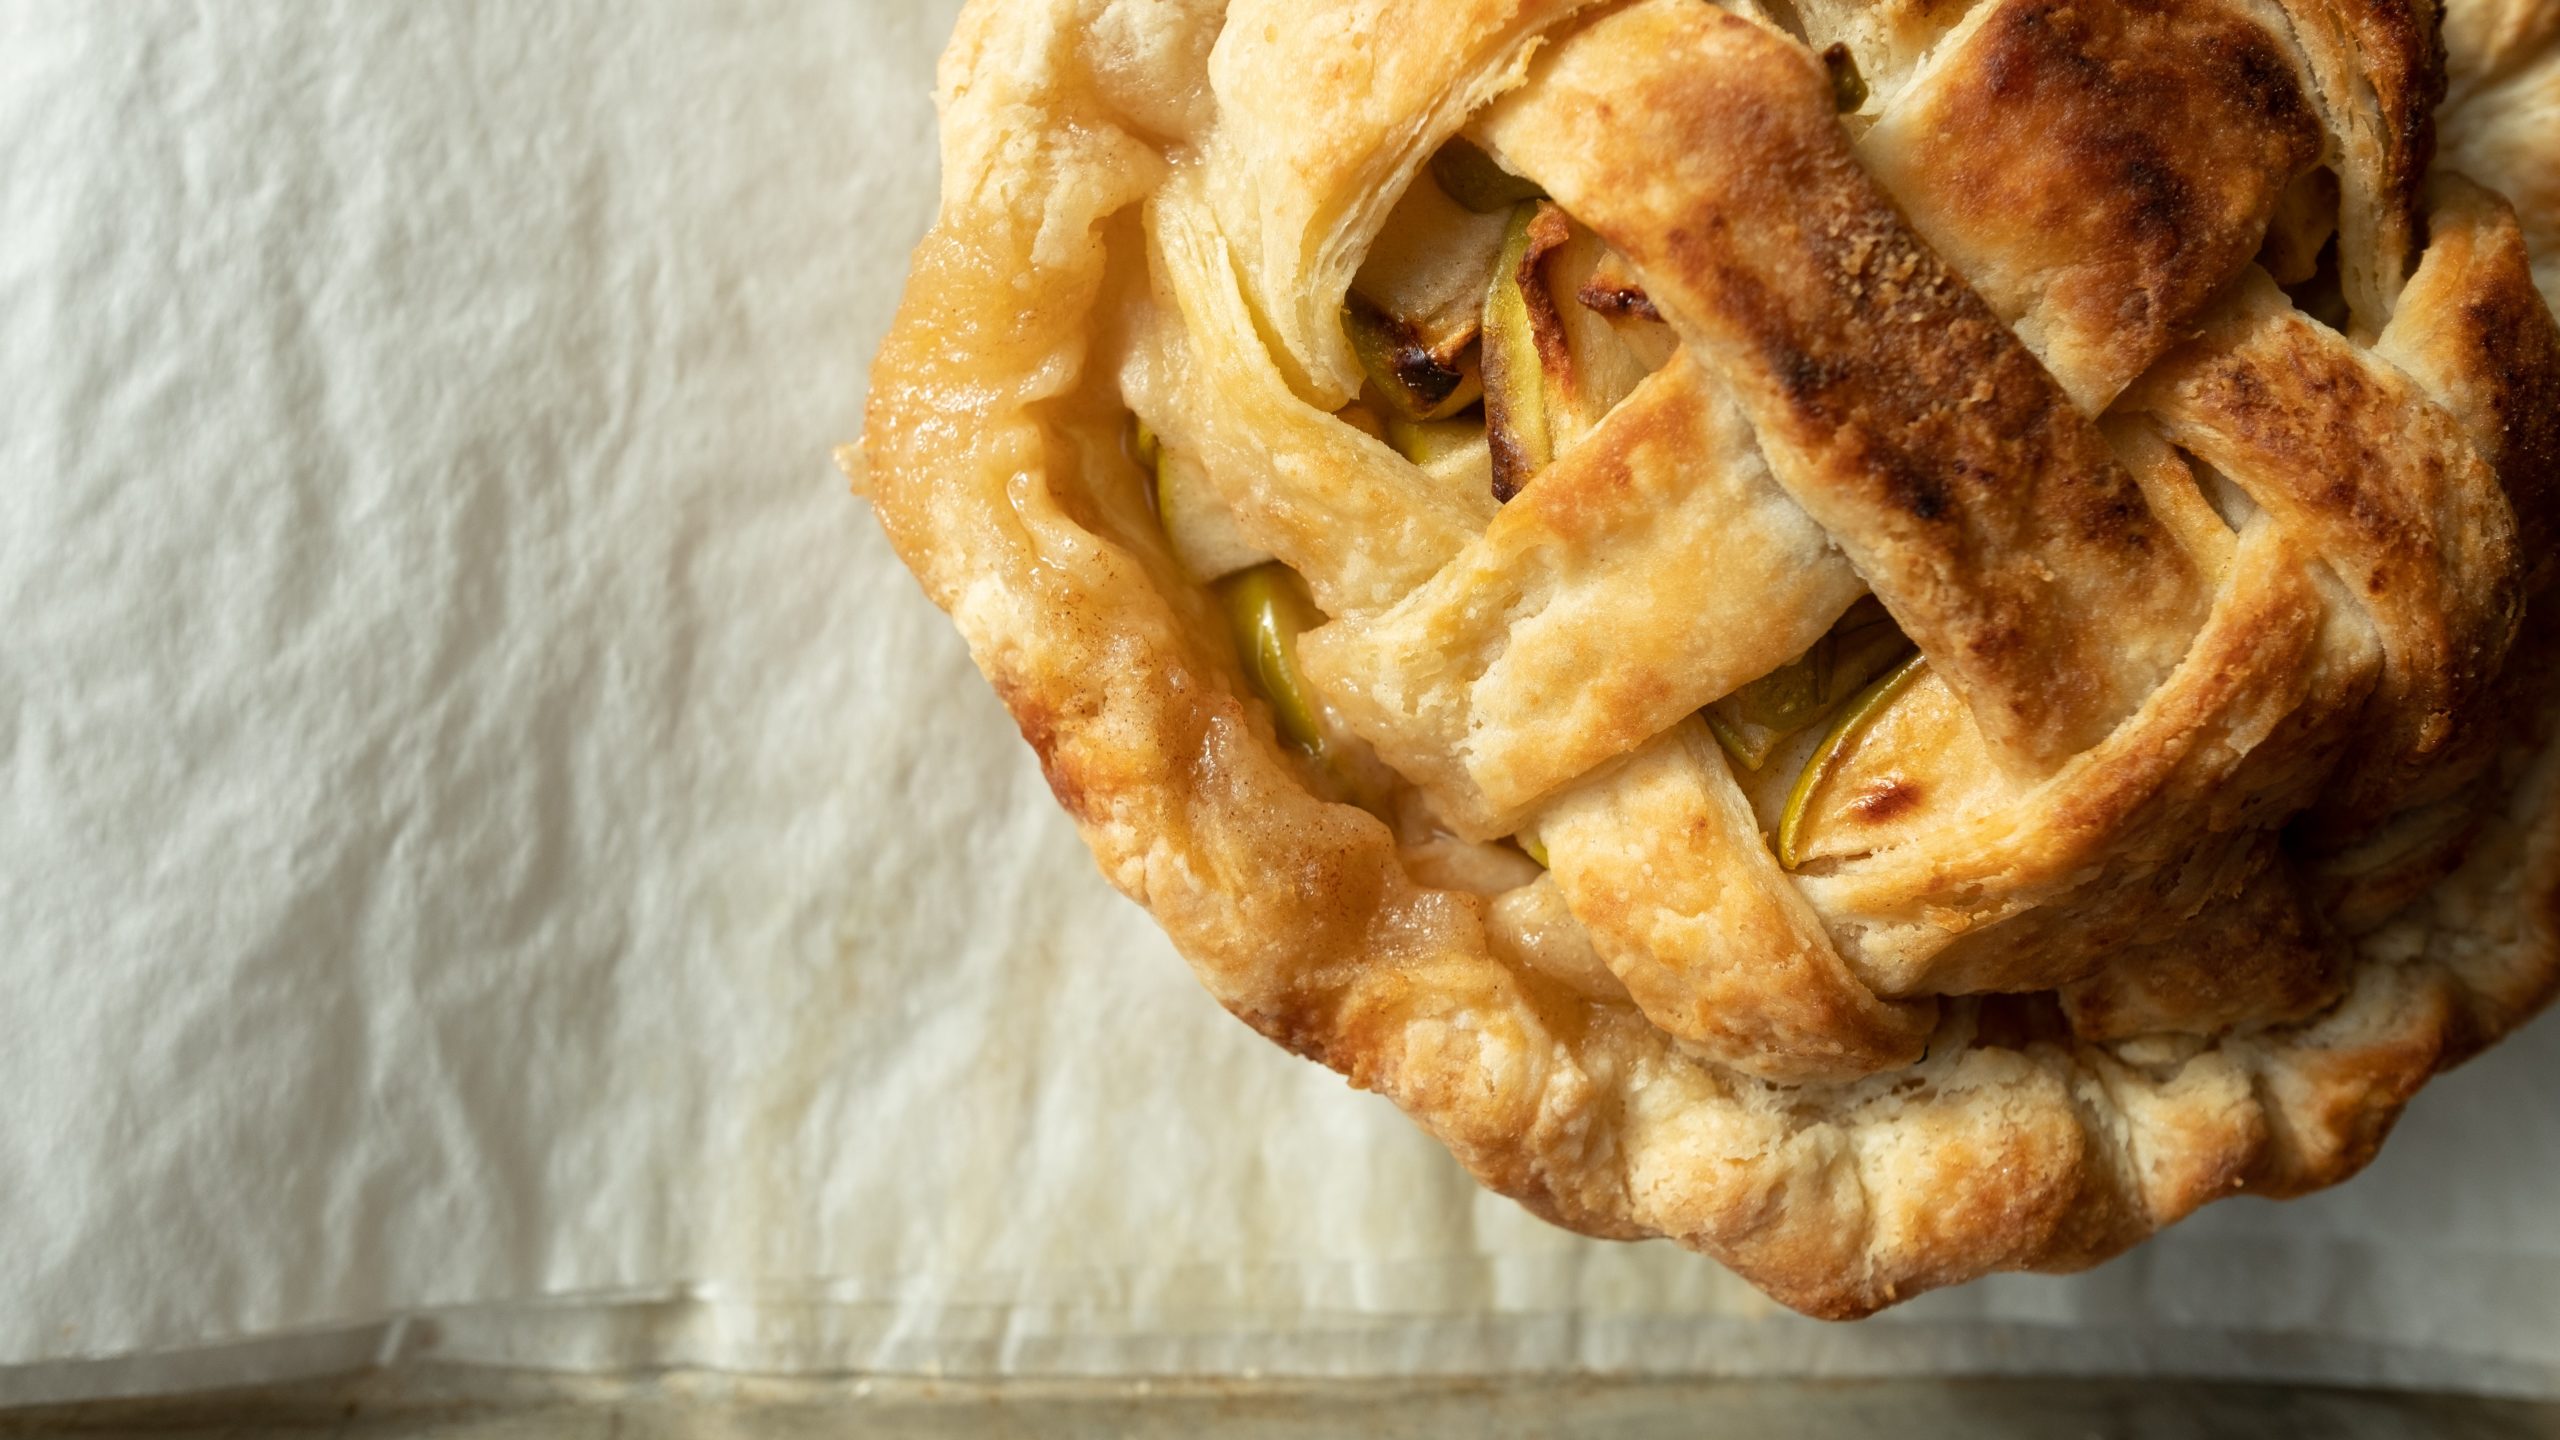 Why You Shouldn’t Bake Your Pies in an Air Fryer